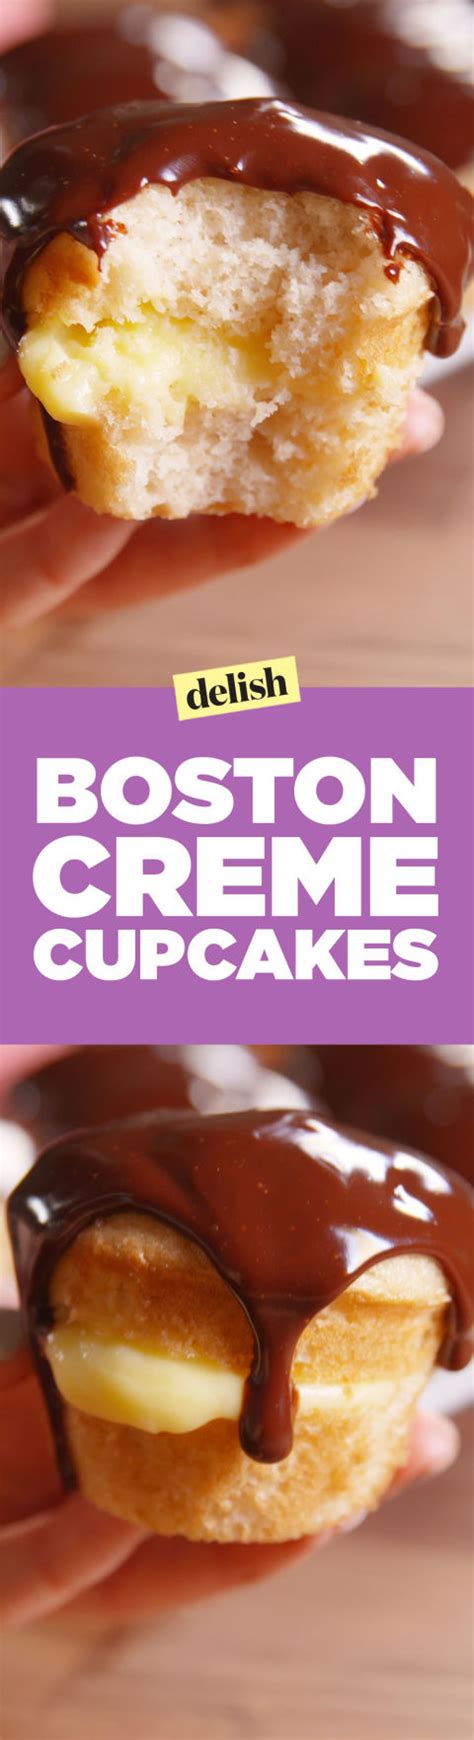 Bring the mixture to a boil, then reduce the heat to a simmer and cook, whisking constantly, for 5 to assemble, cut each cupcake in half crosswise. Best Boston Cream Cupcakes Recipe-How To Make Boston Cream ...